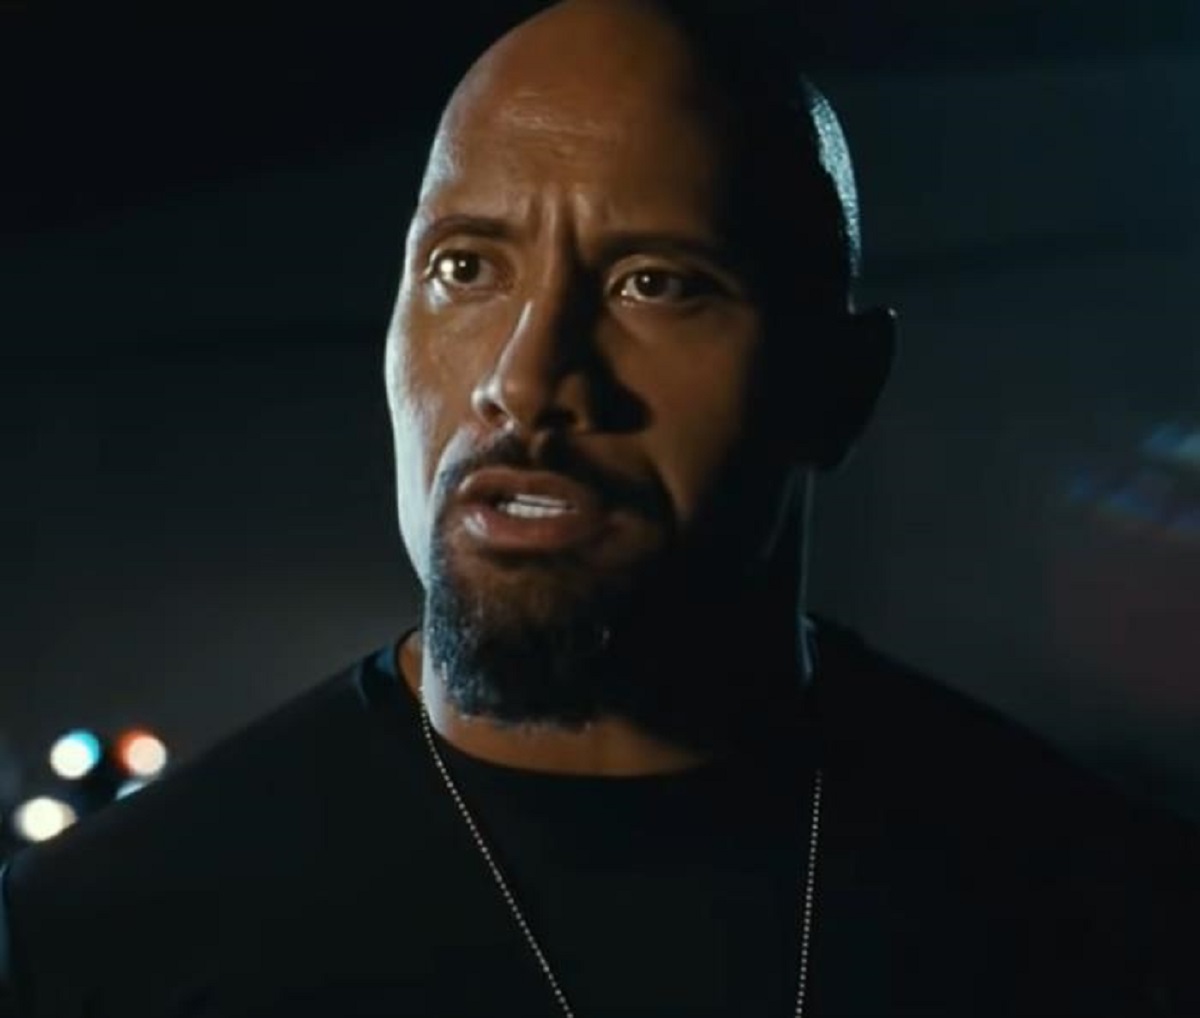 The Rock/Dwayne Johnson.

I think stuff is just starting to come out since he’s always been super controlling of his public image, but it seems like the guy is a complete and total sociopath.